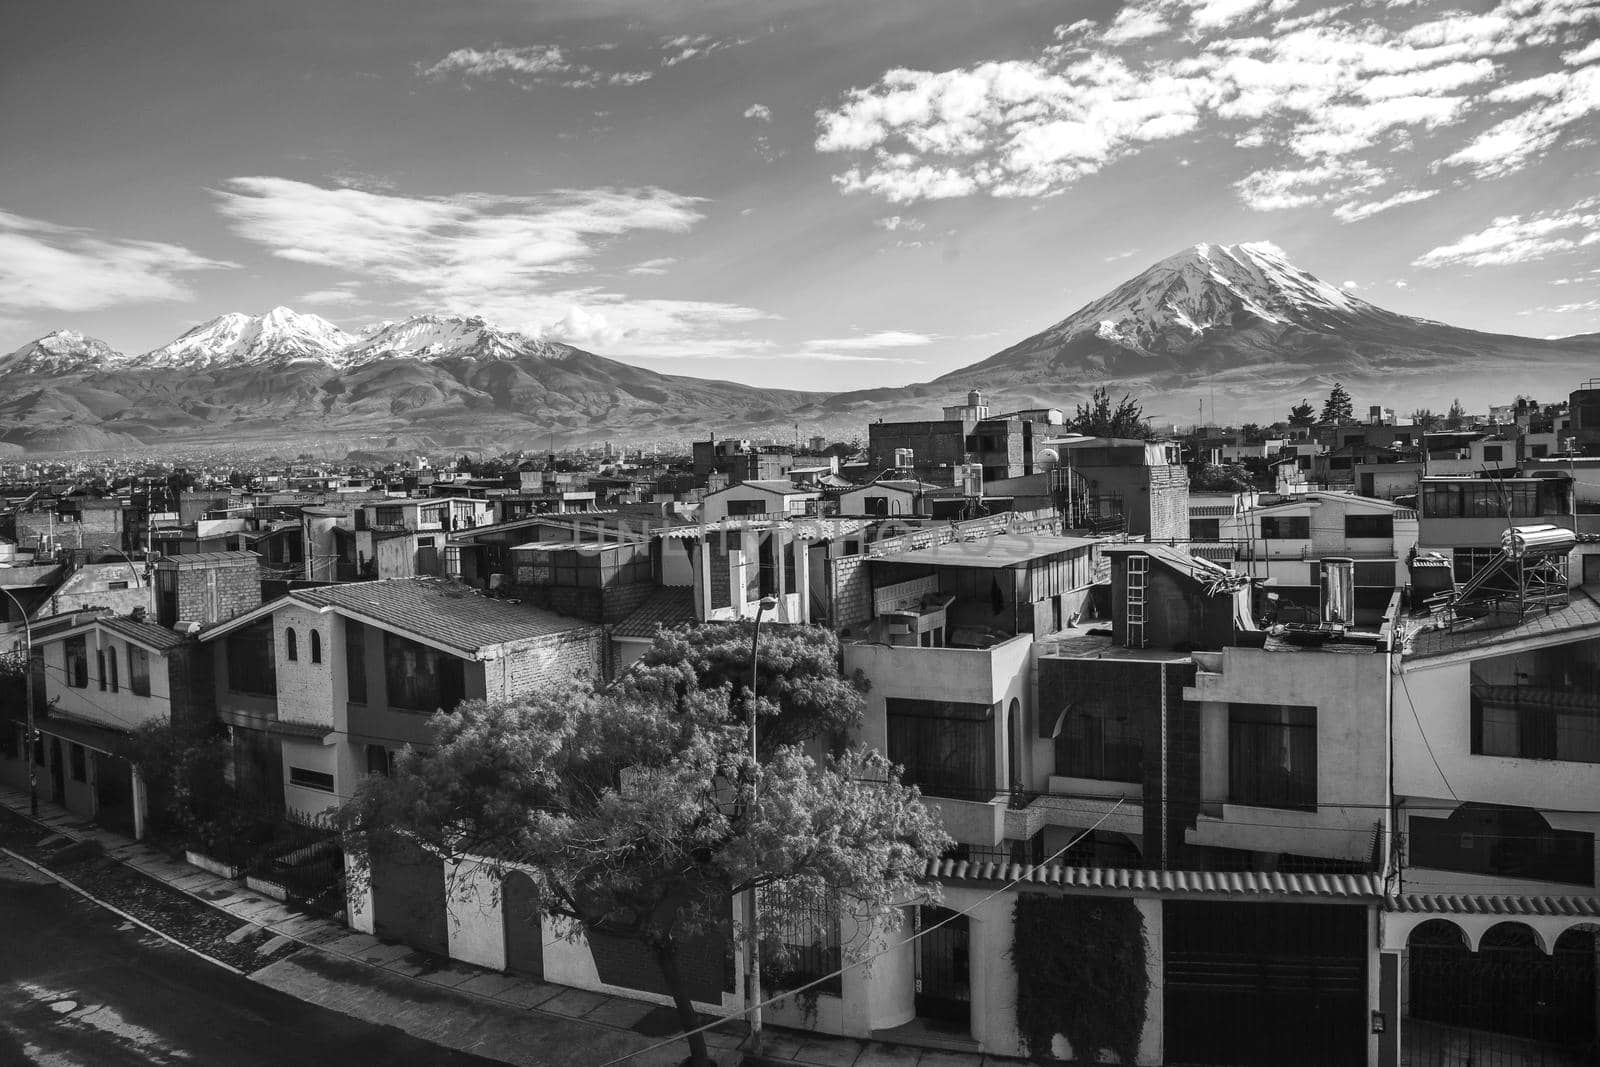 City of Arequipa with its iconic active volcanos of Misti and Chachani, Peru